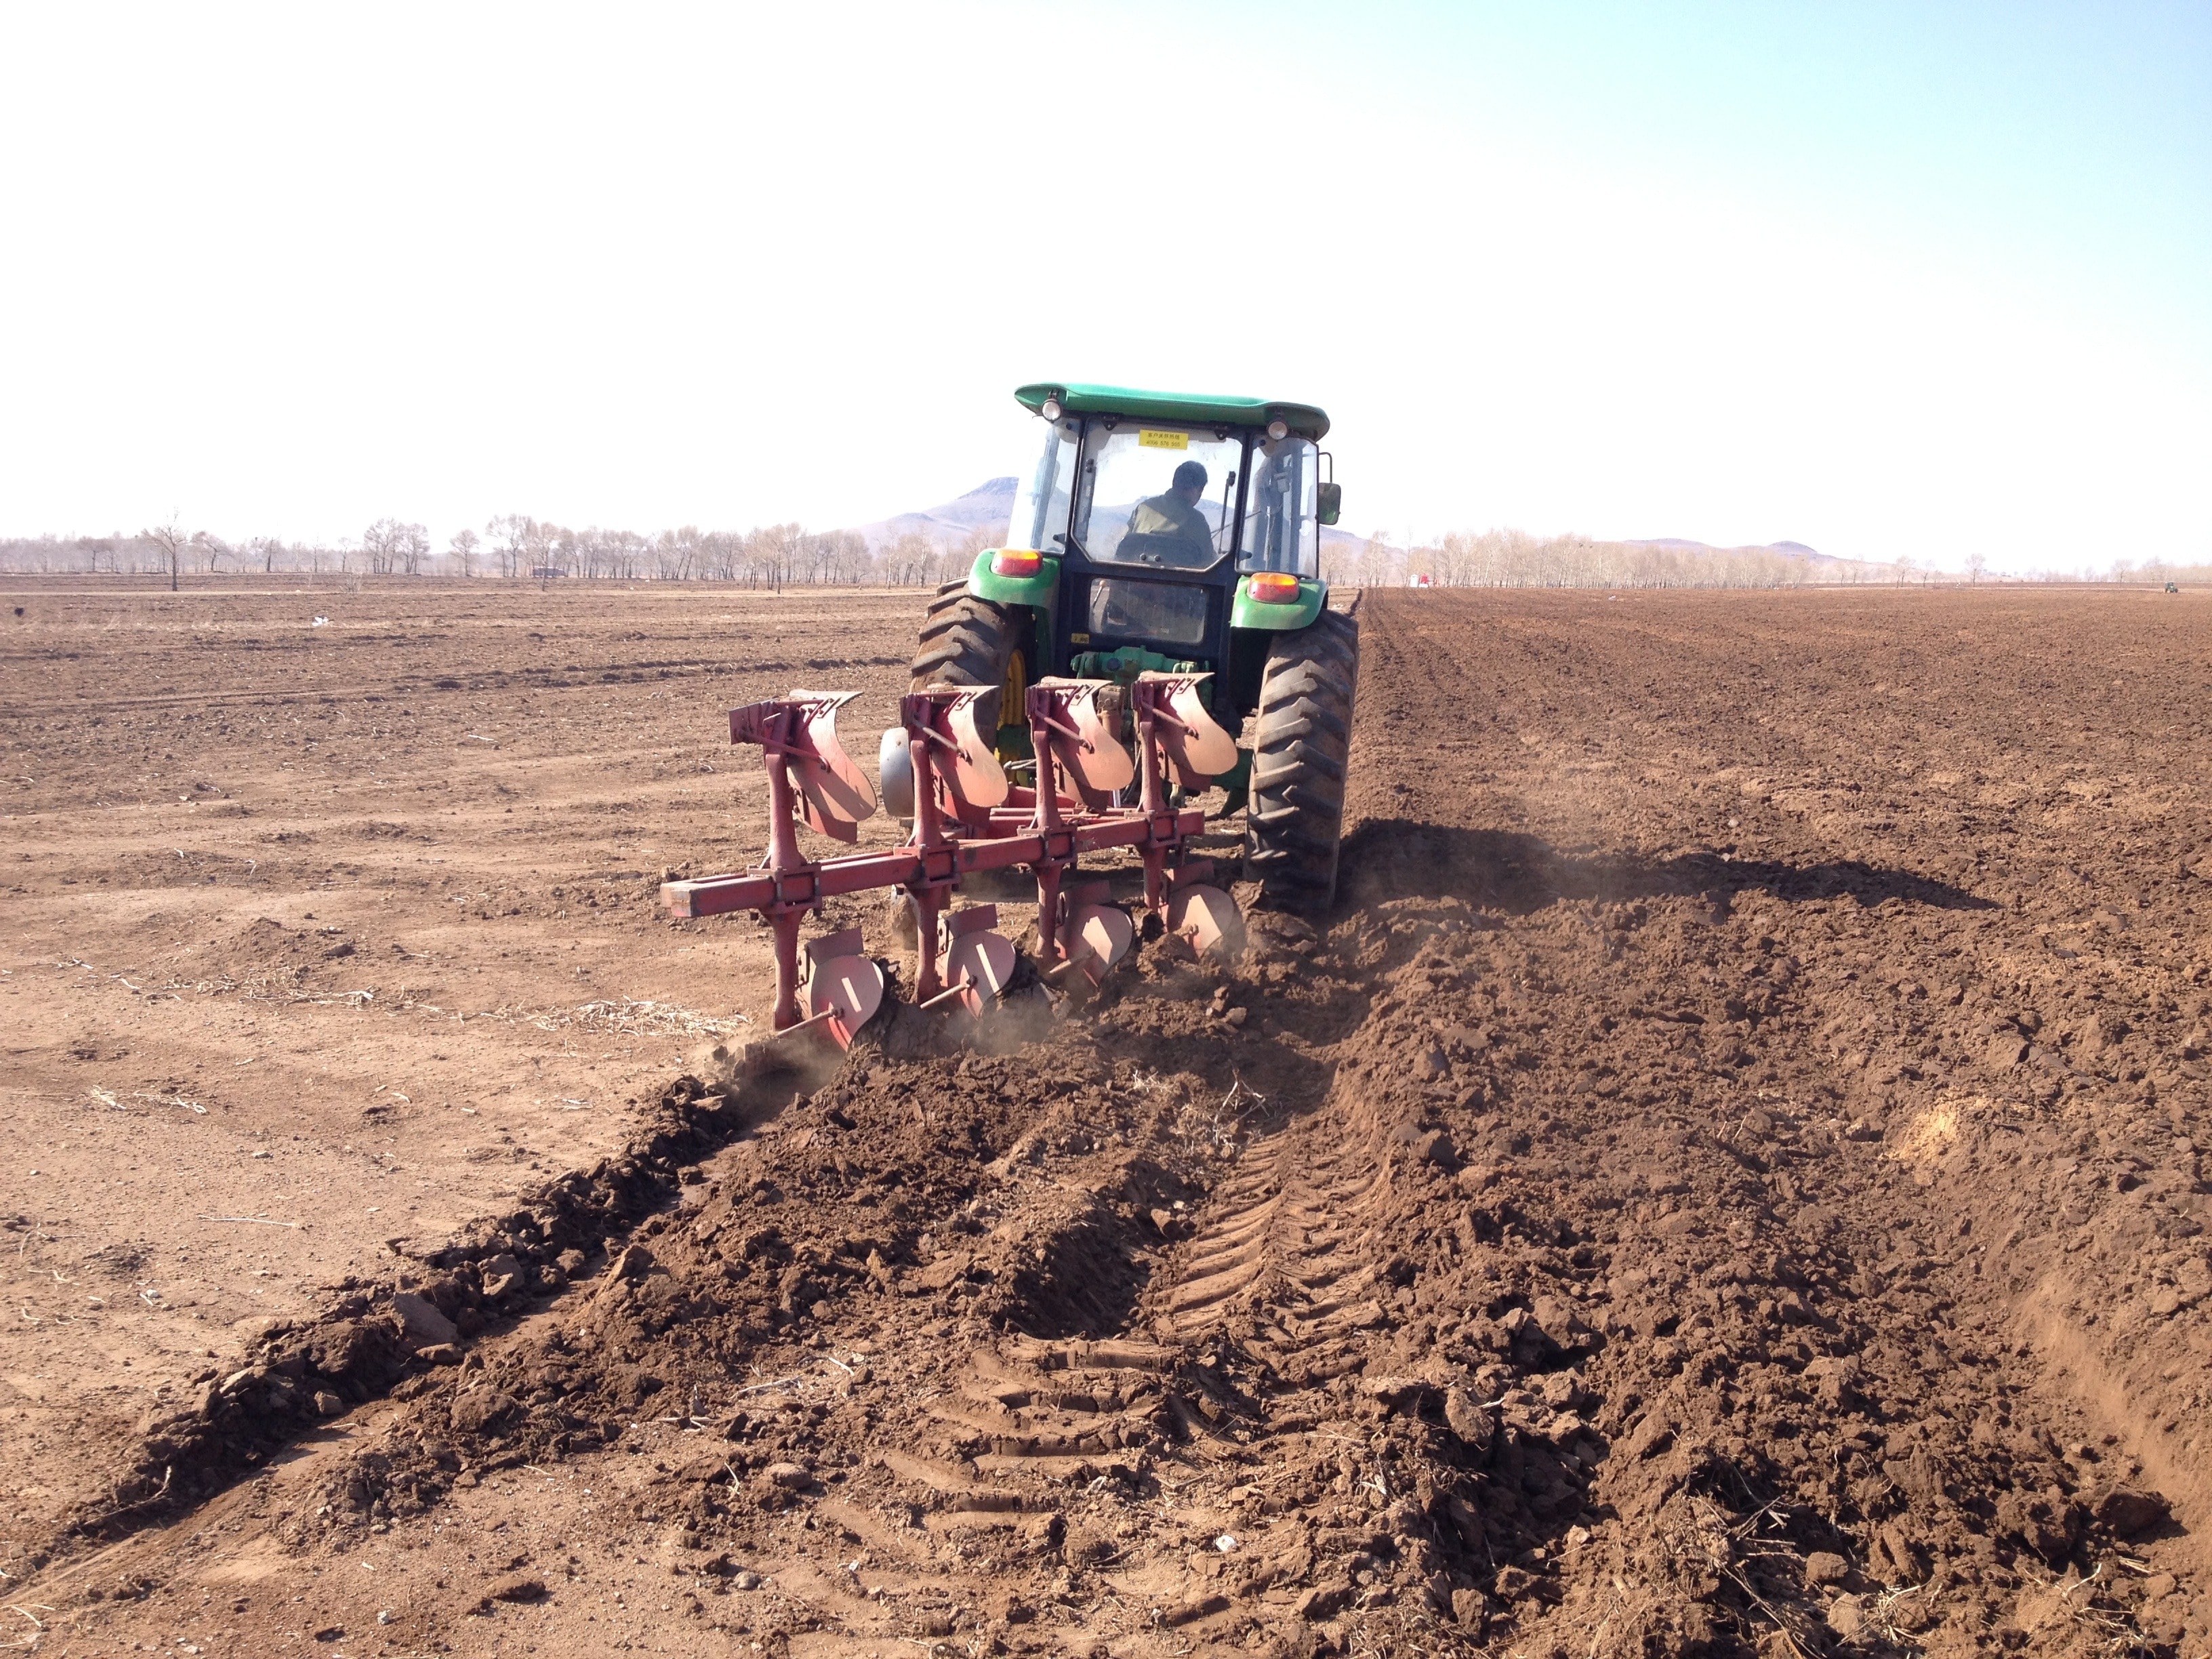 man driving green tractor with disk harrow on dirt field during daytime